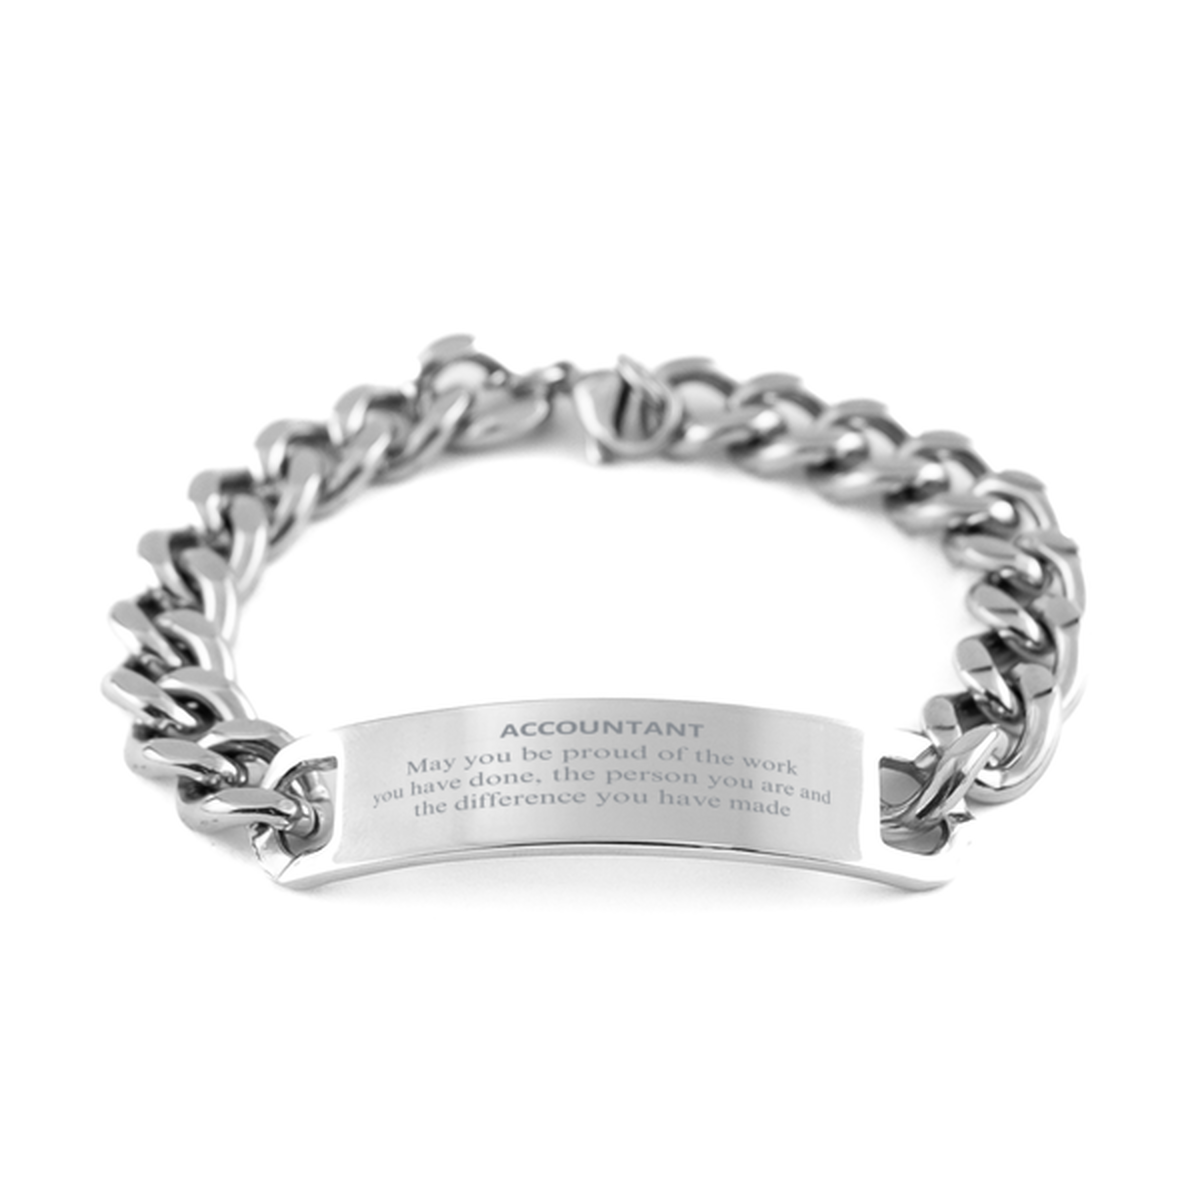 Accountant May you be proud of the work you have done, Retirement Accountant Cuban Chain Stainless Steel Bracelet for Colleague Appreciation Gifts Amazing for Accountant